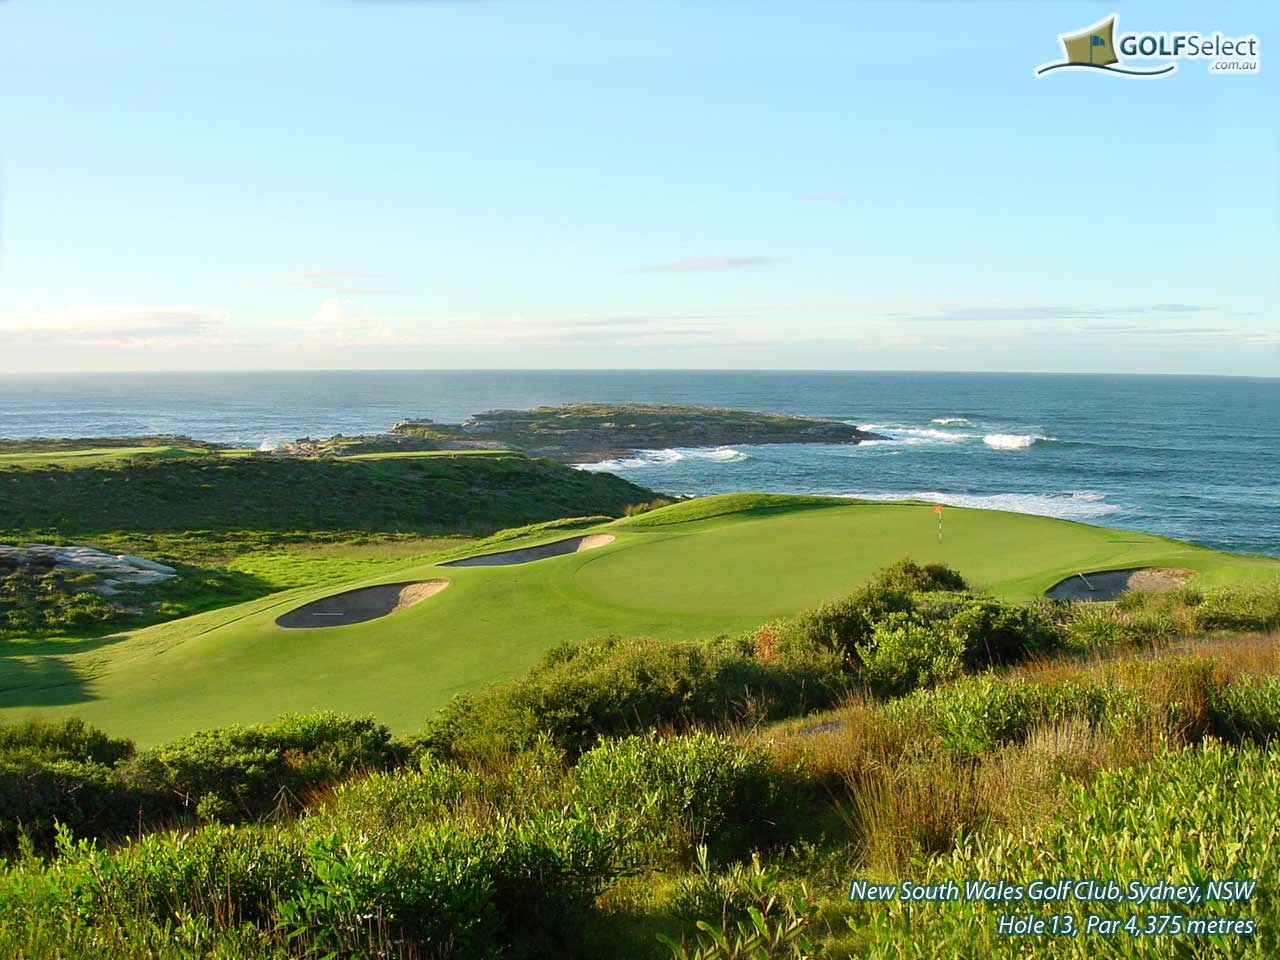 The New South Wales Golf Club Hole 13